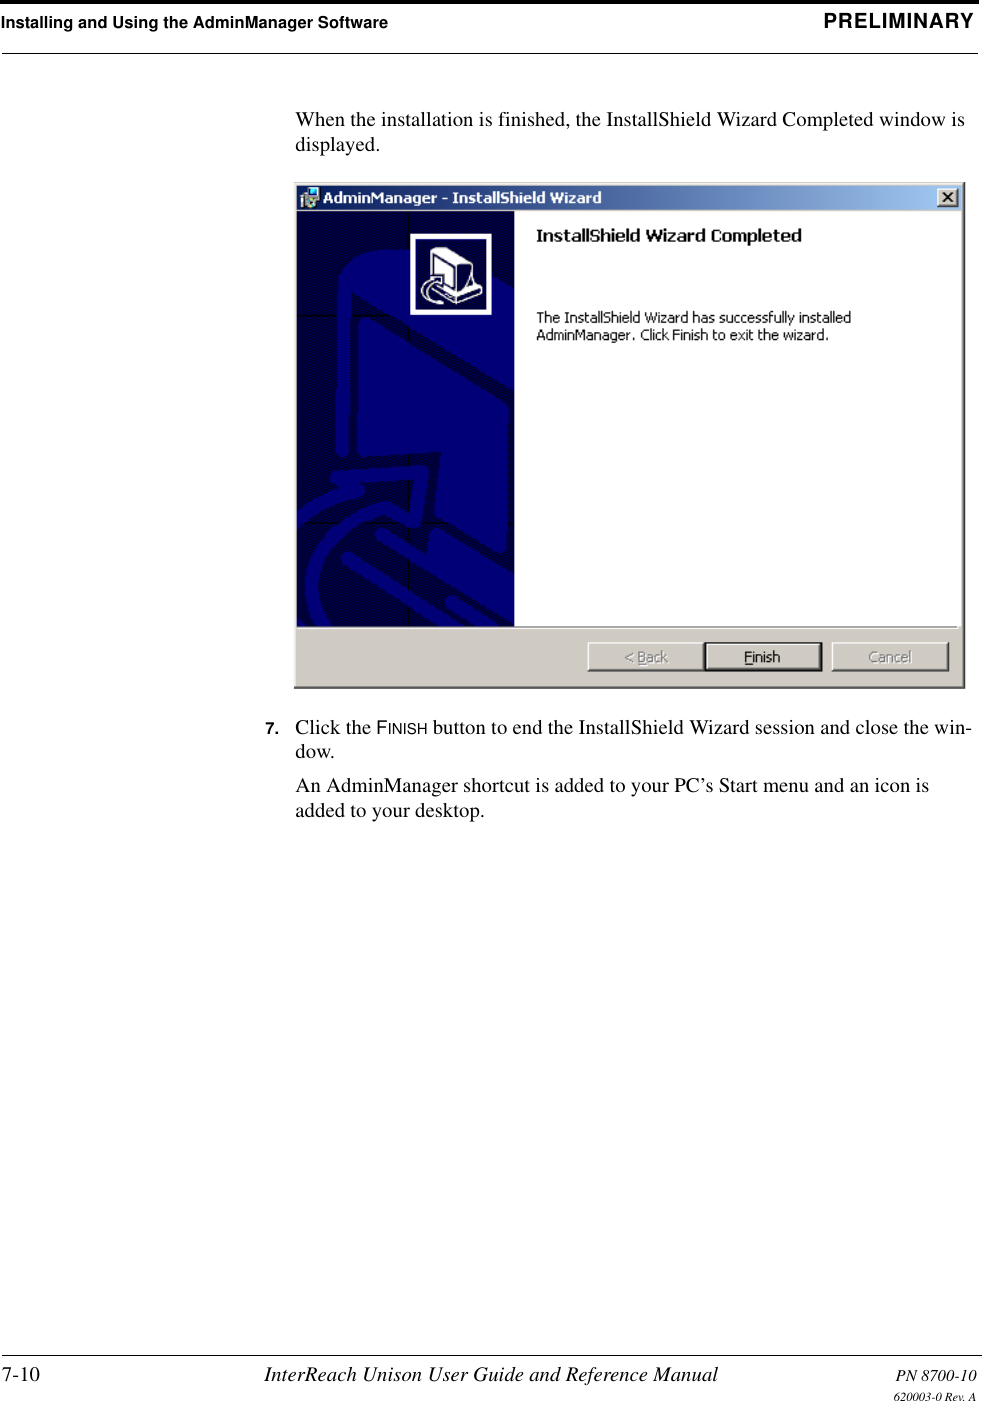 Installing and Using the AdminManager Software PRELIMINARY7-10 InterReach Unison User Guide and Reference Manual PN 8700-10620003-0 Rev. AWhen the installation is finished, the InstallShield Wizard Completed window is displayed.7. Click the FINISH button to end the InstallShield Wizard session and close the win-dow.An AdminManager shortcut is added to your PC’s Start menu and an icon is added to your desktop.